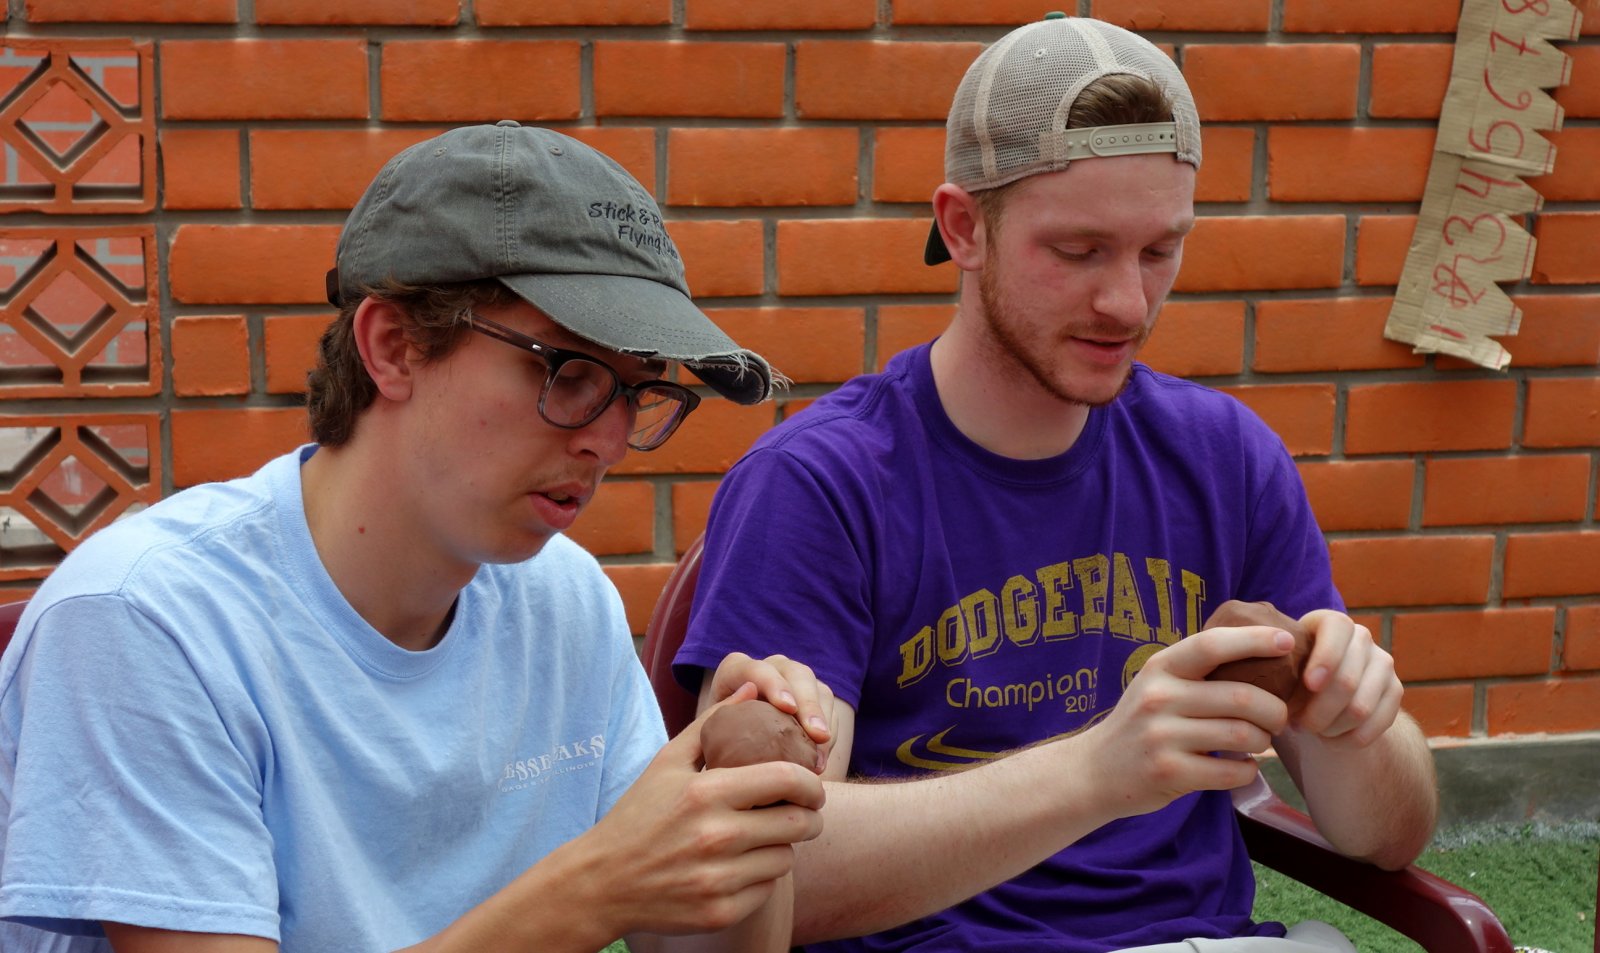 Goshen Student, Isaac Longenecker, pictured on the left, visits Manos Amigas in Peru.